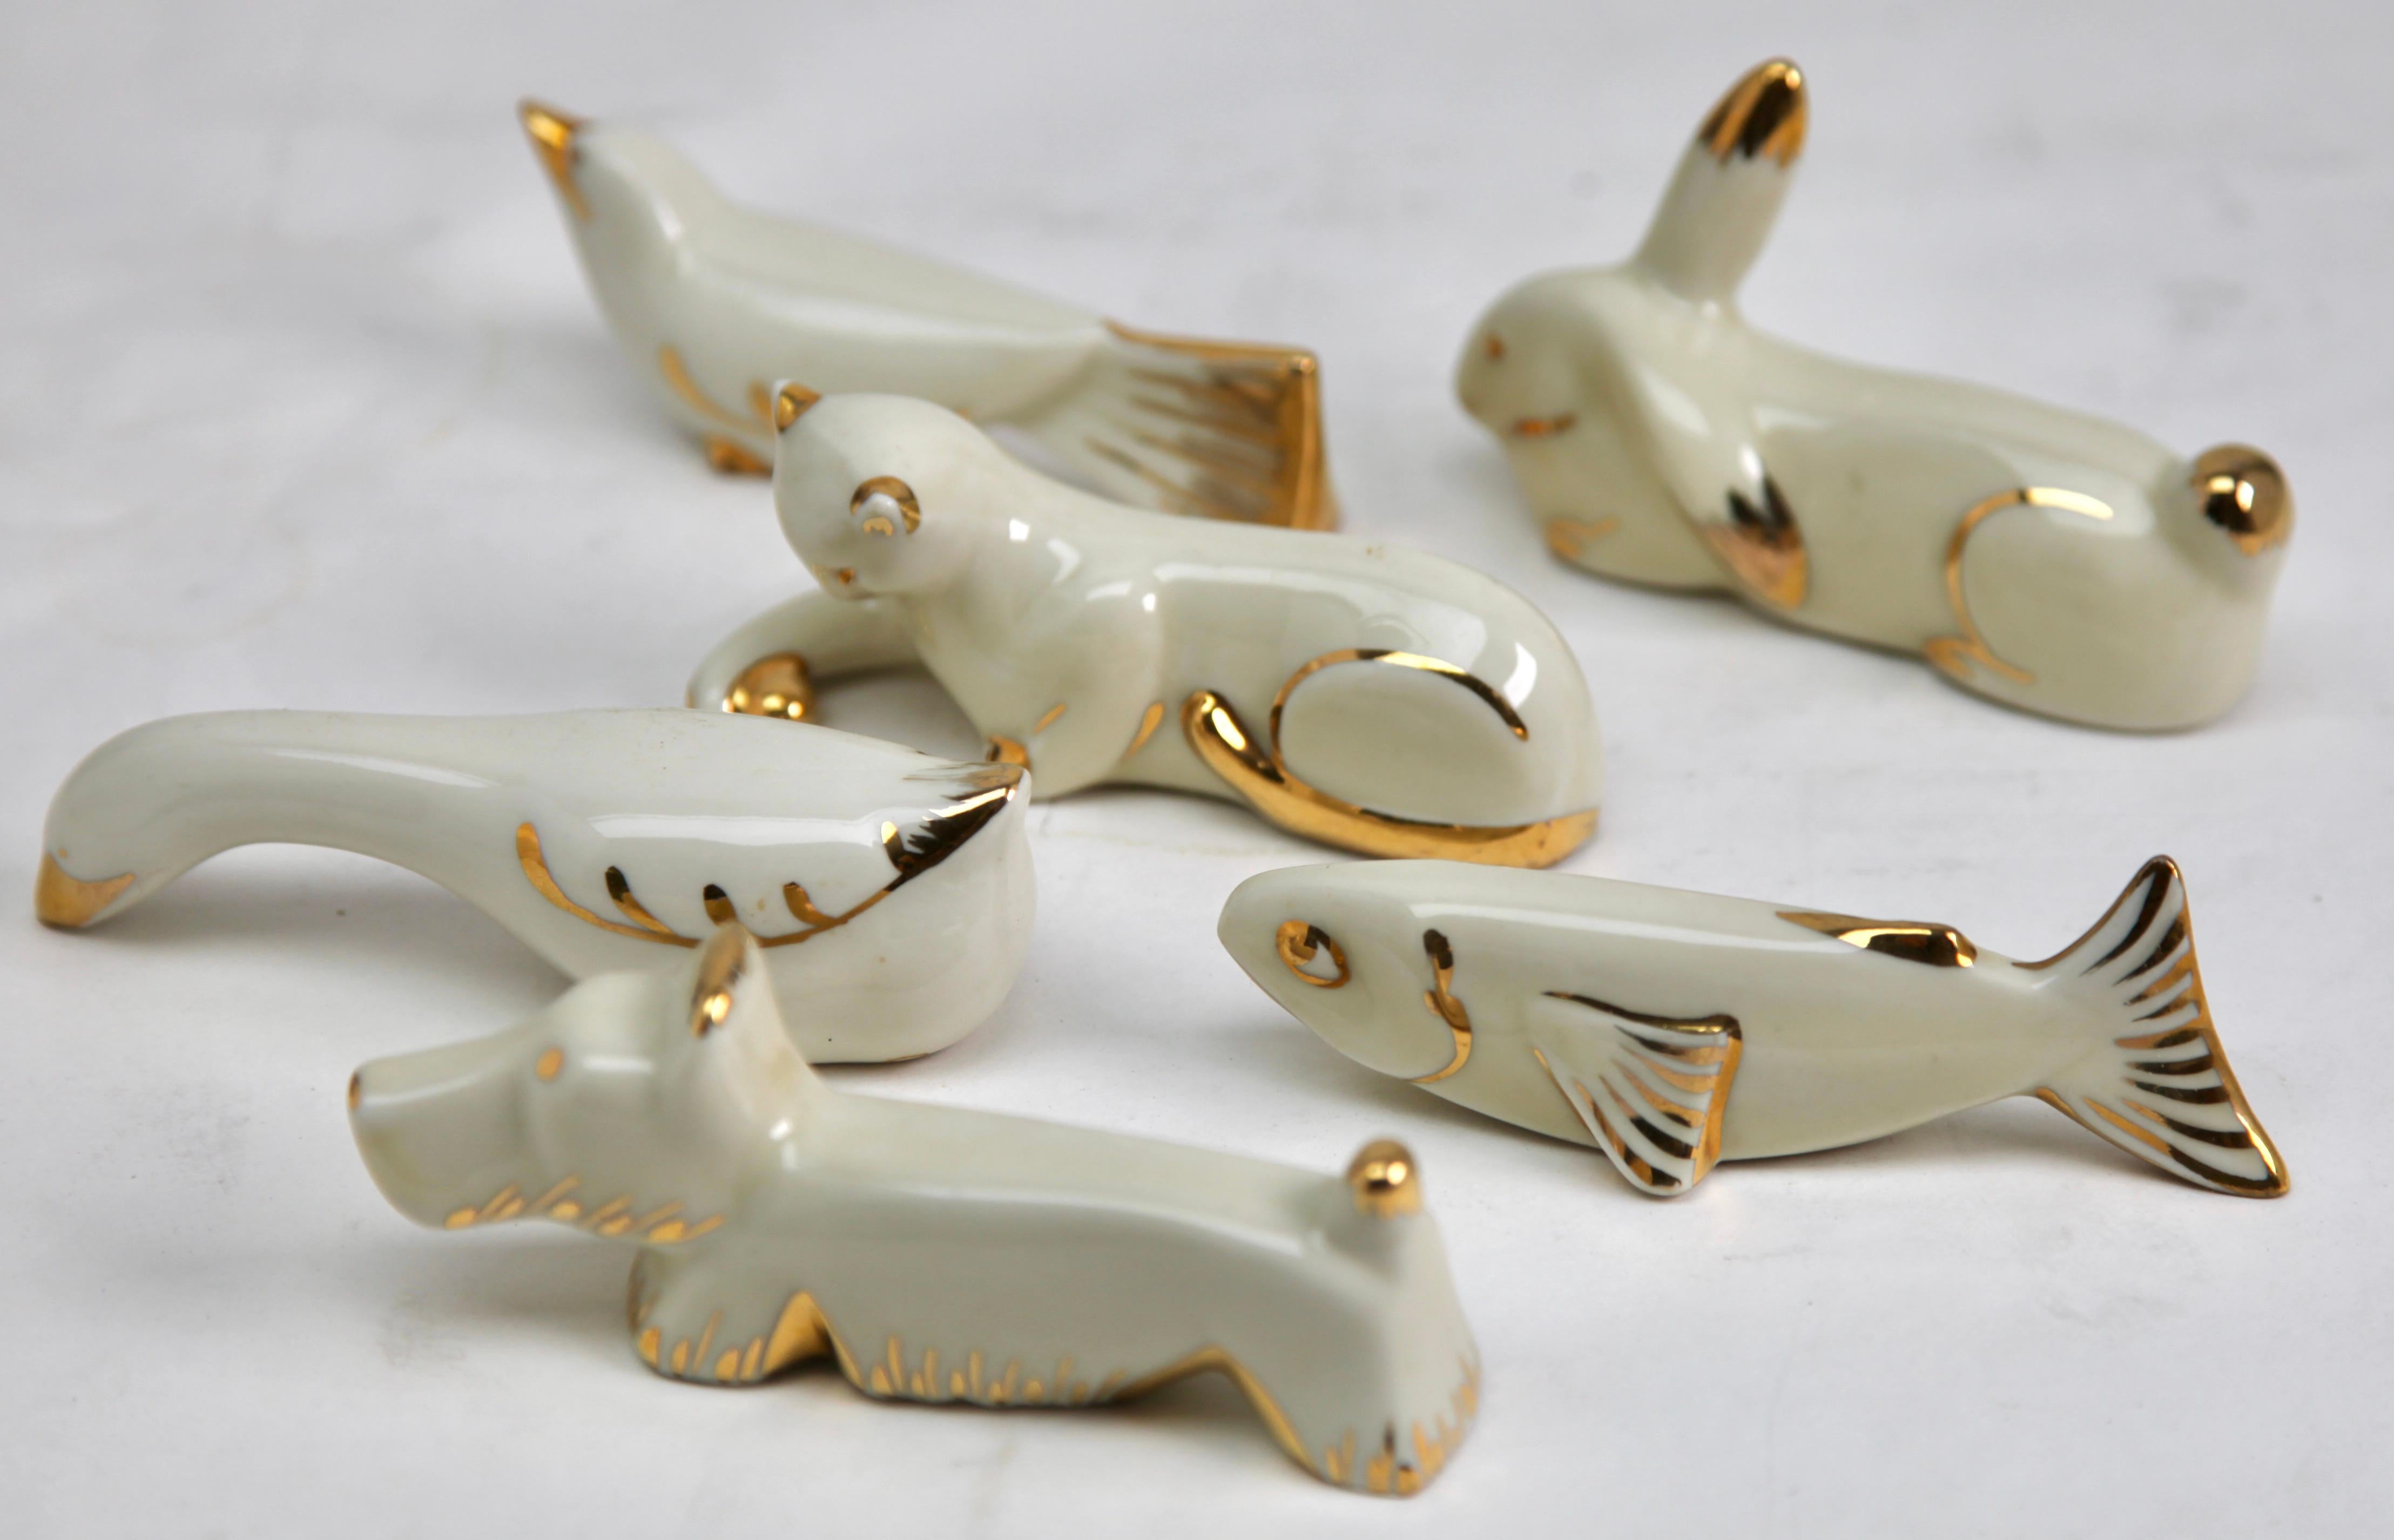 Limoges 'Signed' France Knife Rests, Set of 12 Pieces 
2 Pieces of each Animal
This is a set of 12 pieces in porcelain with hand-applied gold highlights bearing the decorator's mark.
Cute additions for a formal table.
Limoges is one of the best